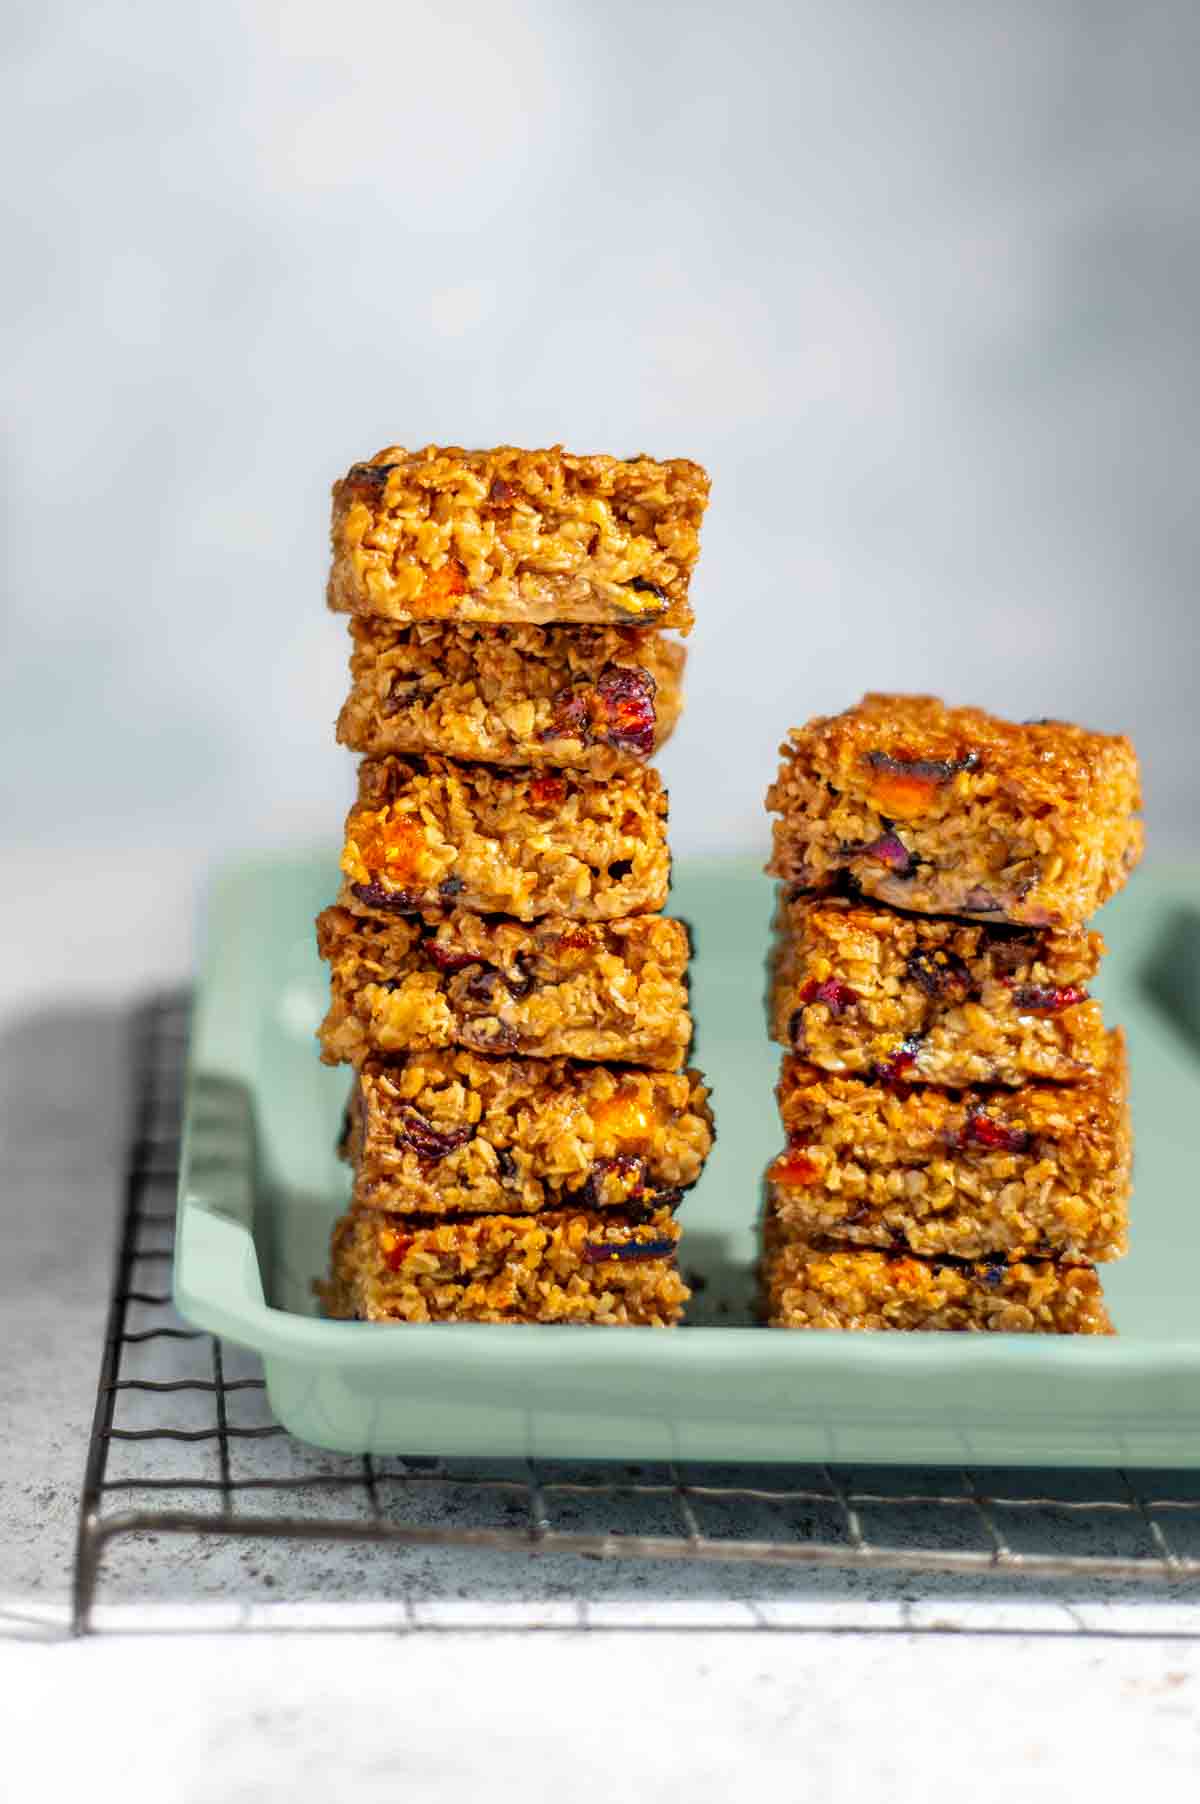 Two stacks of fruity flapjacks on a green baking tray.